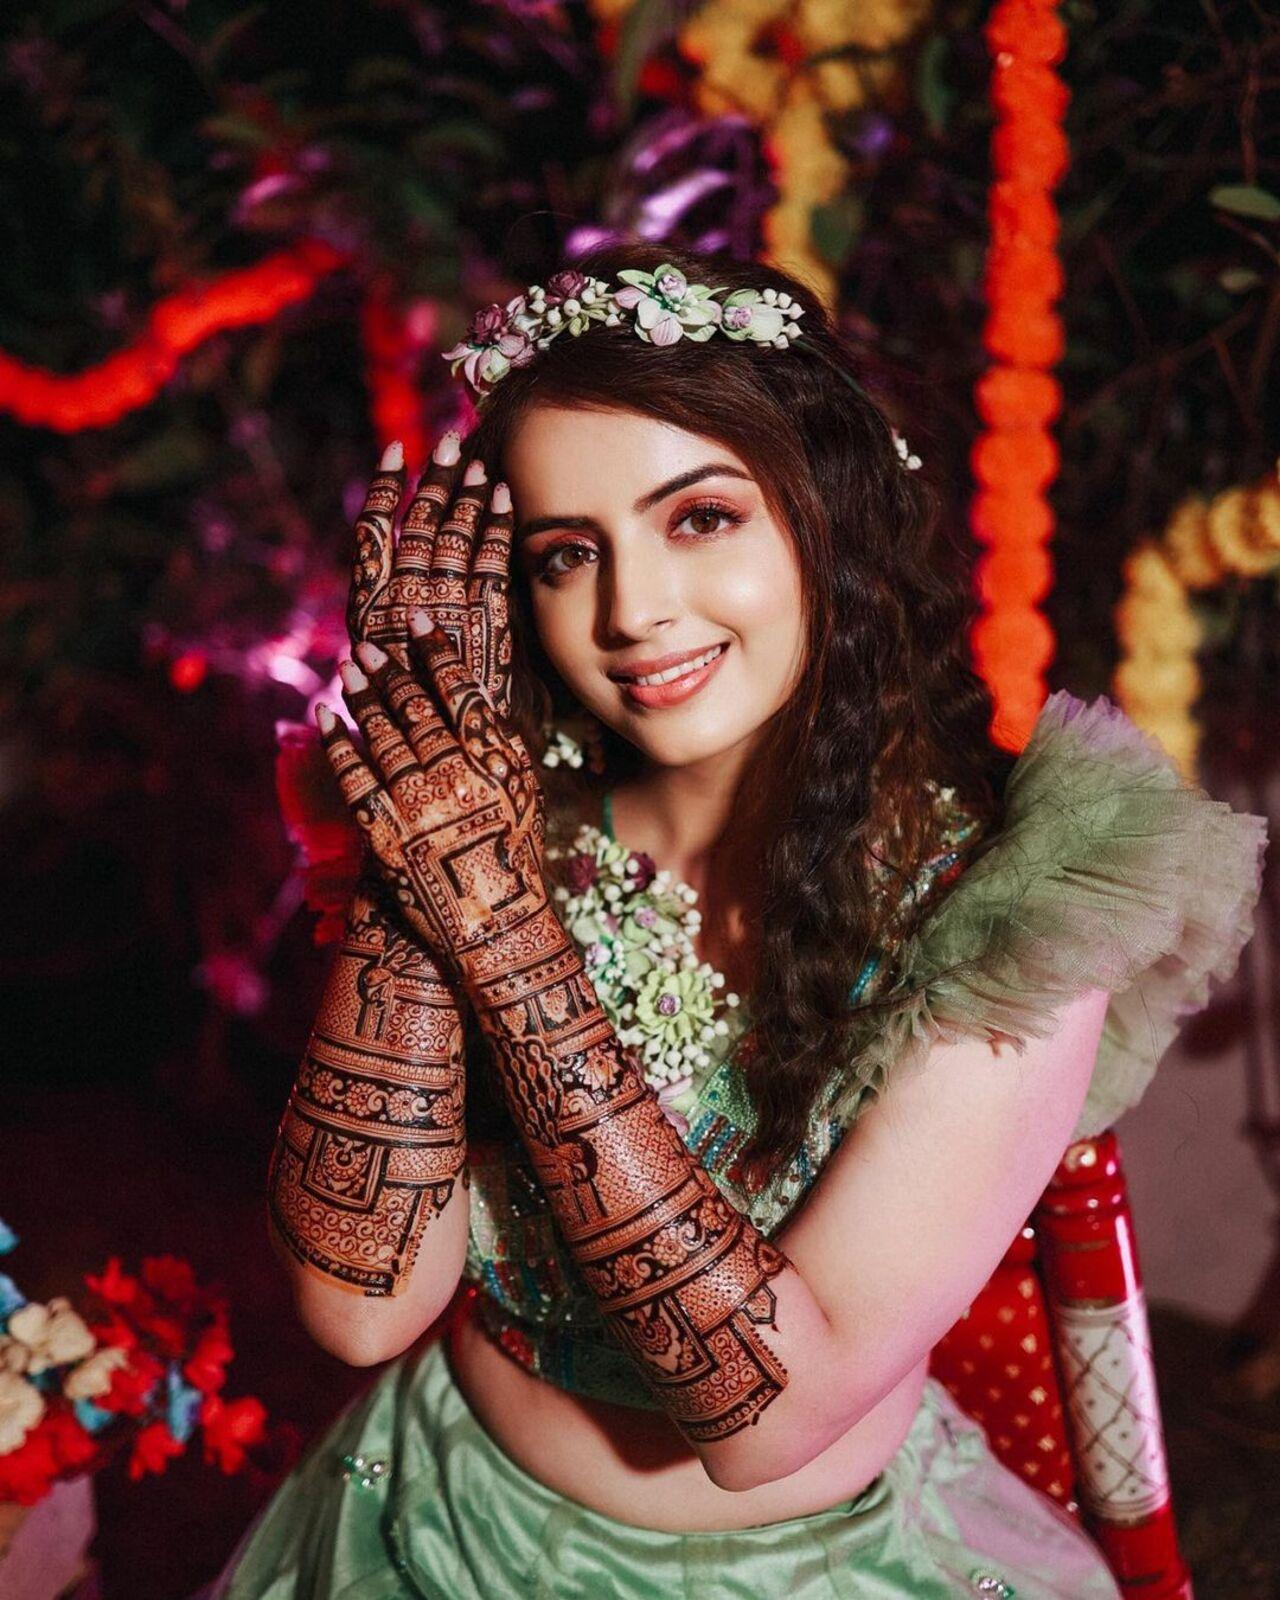 Shrenu Parikh took to her Instagram and shared pictures from her mehendi ceremony